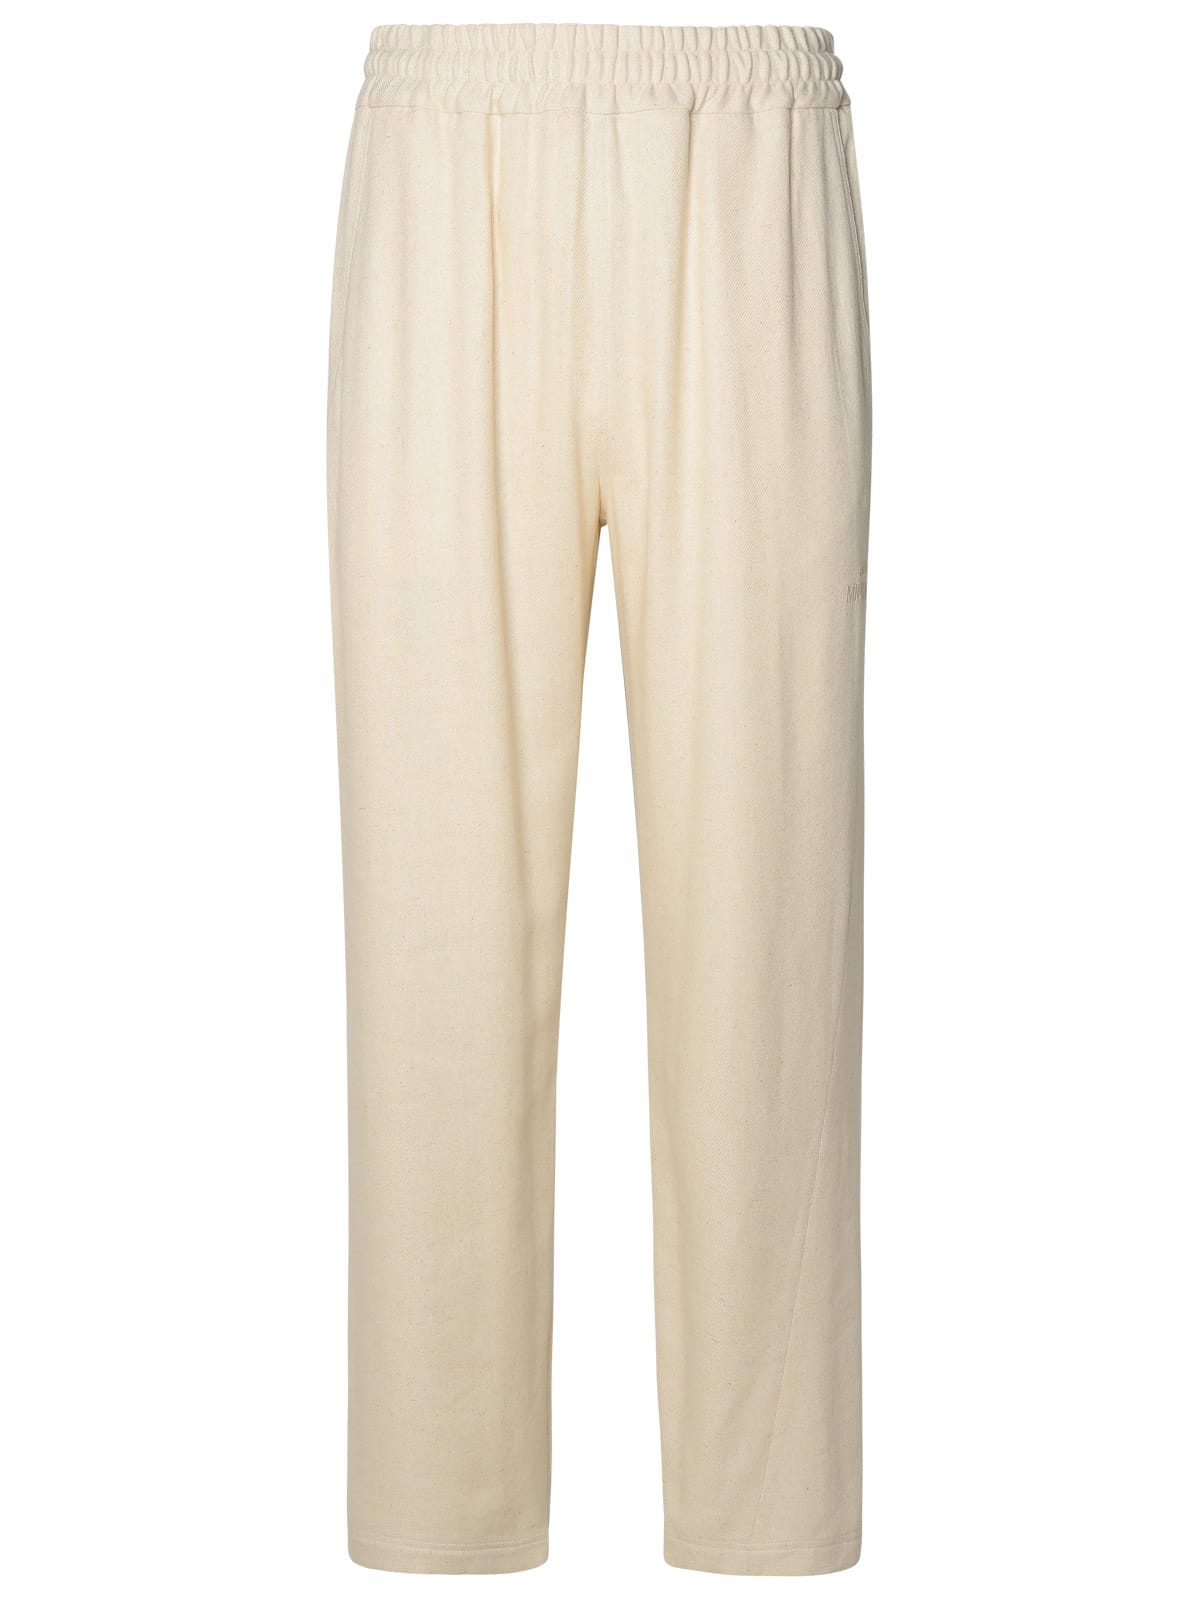 Ivory Linen Blend Trousers